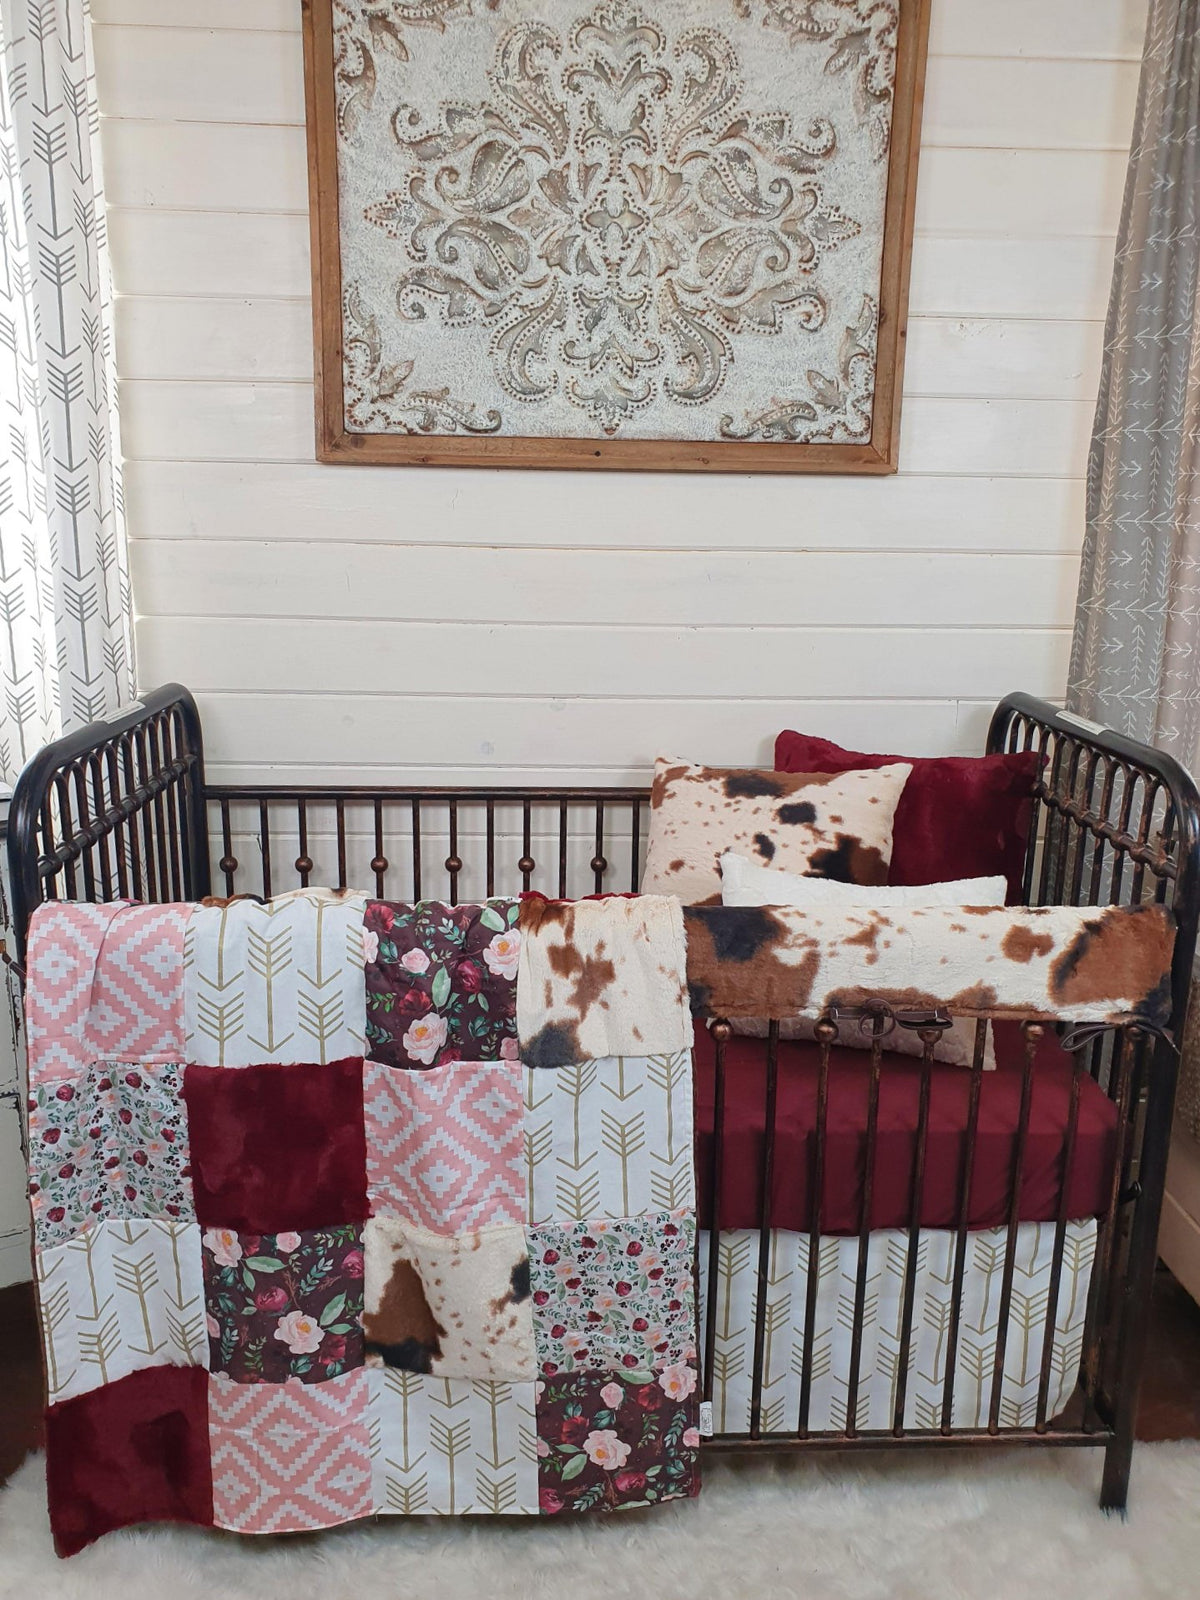 Custom Girl Crib Bedding - Wine Floral and Cow Minky Nursery Collection - DBC Baby Bedding Co 